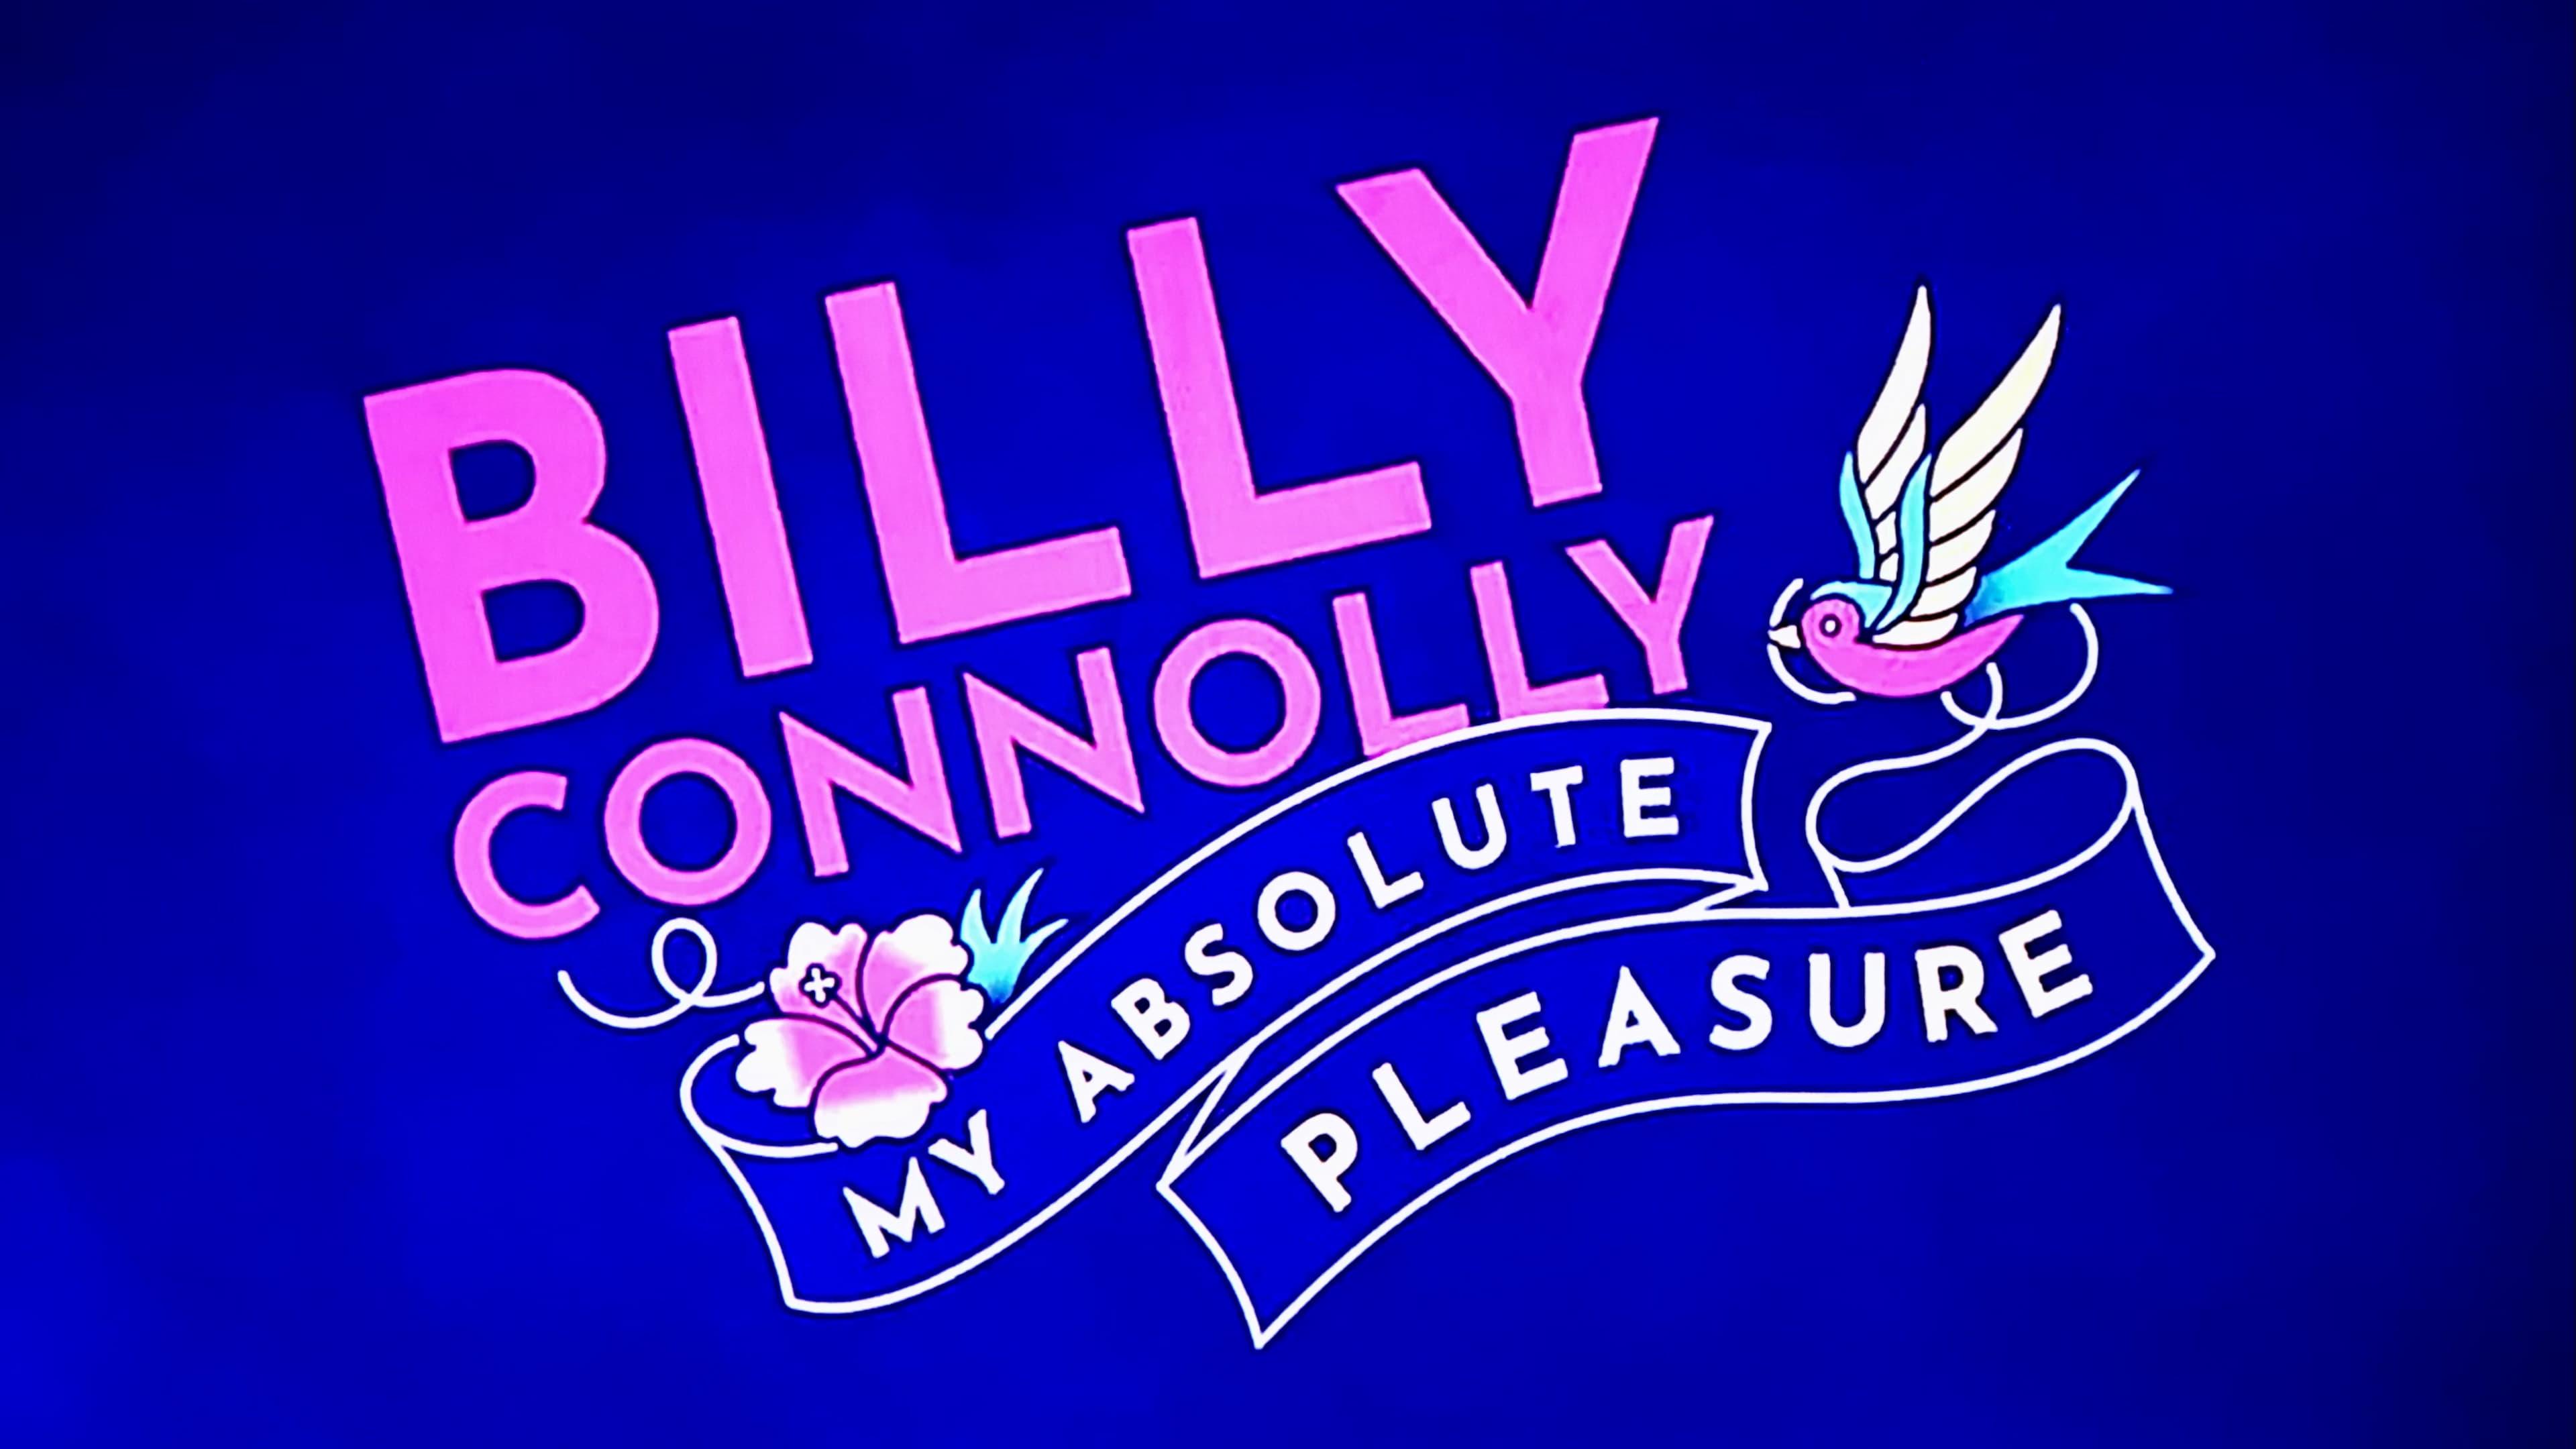 Billy Connolly: My Absolute Pleasure backdrop